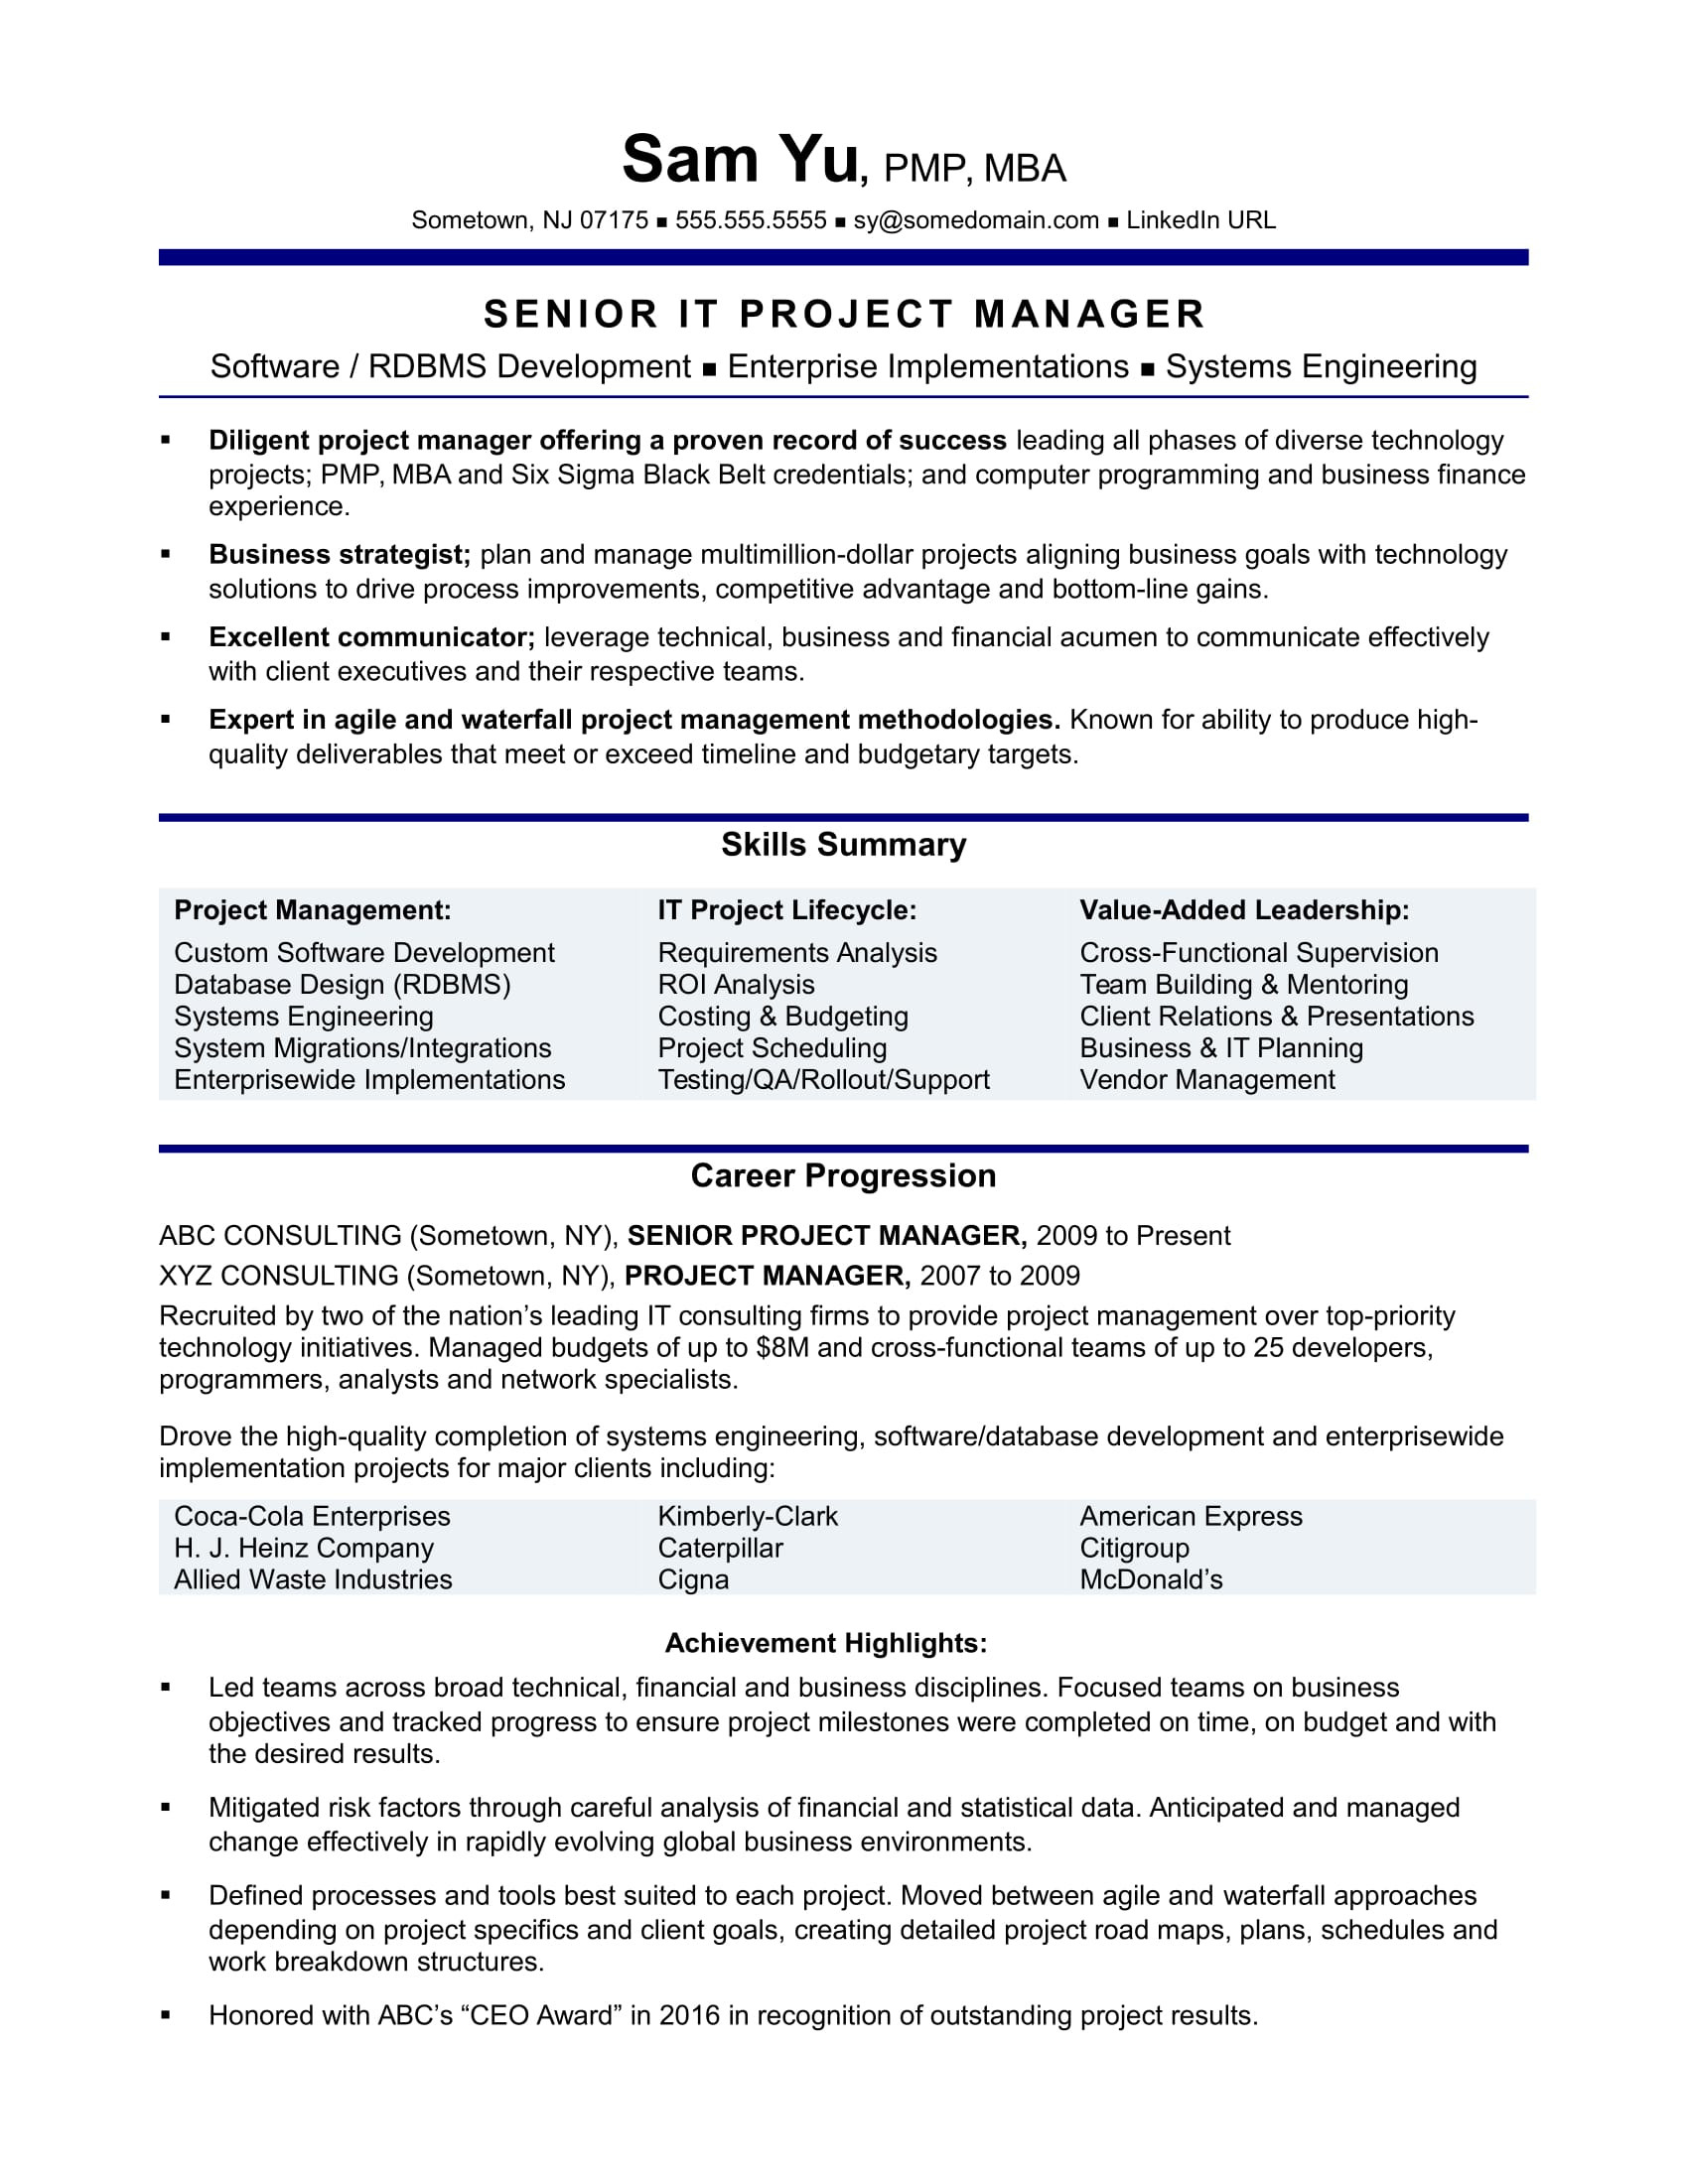 Data Center Project Manager Resume Sample Experienced It Project Manager Resume Monster.com